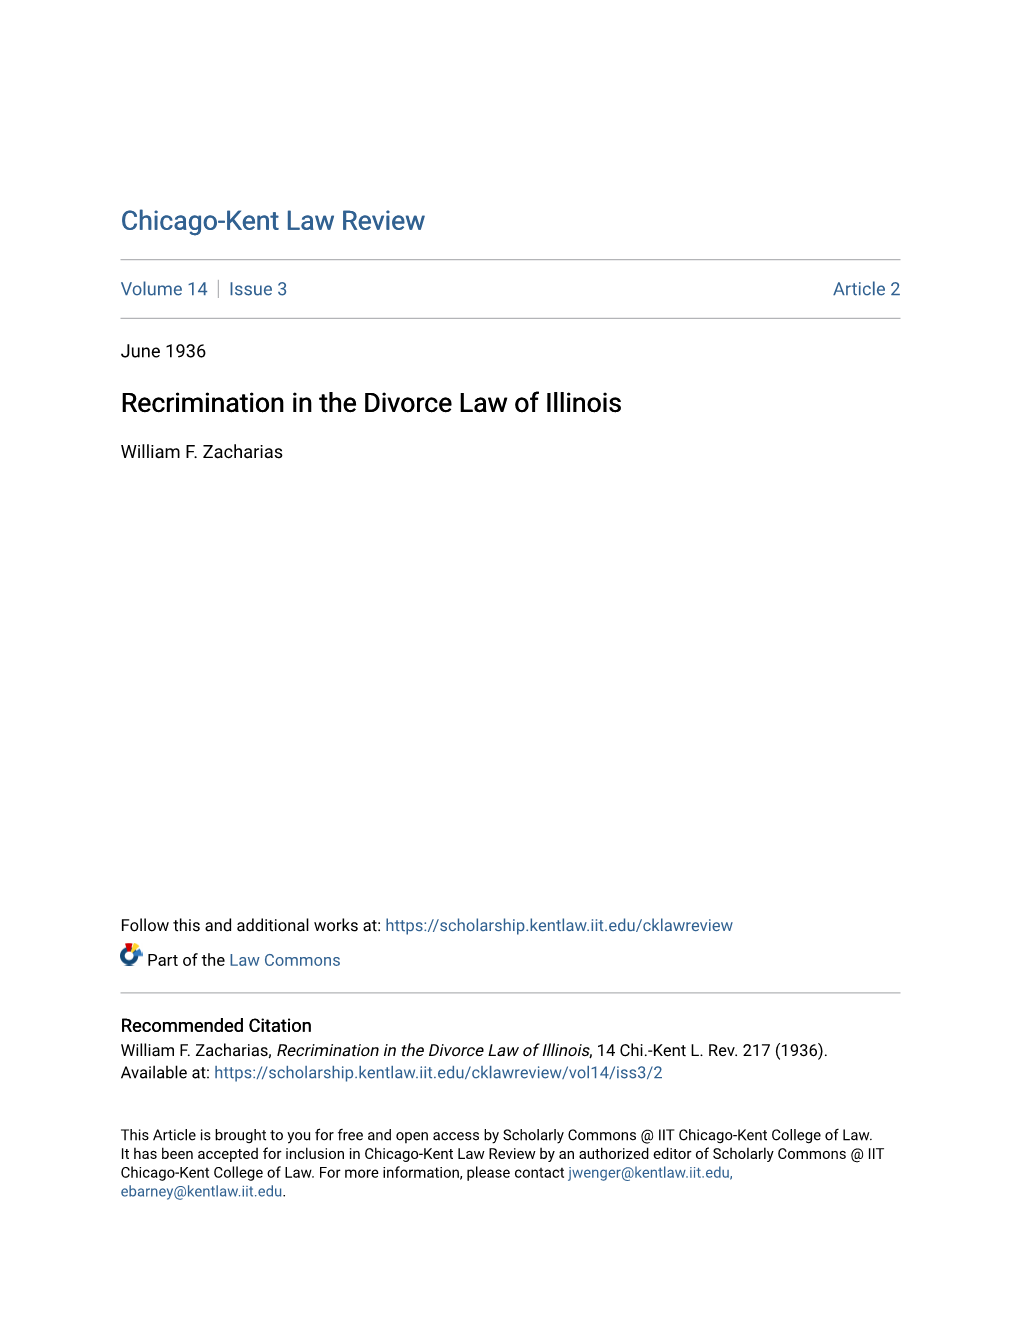 Recrimination in the Divorce Law of Illinois